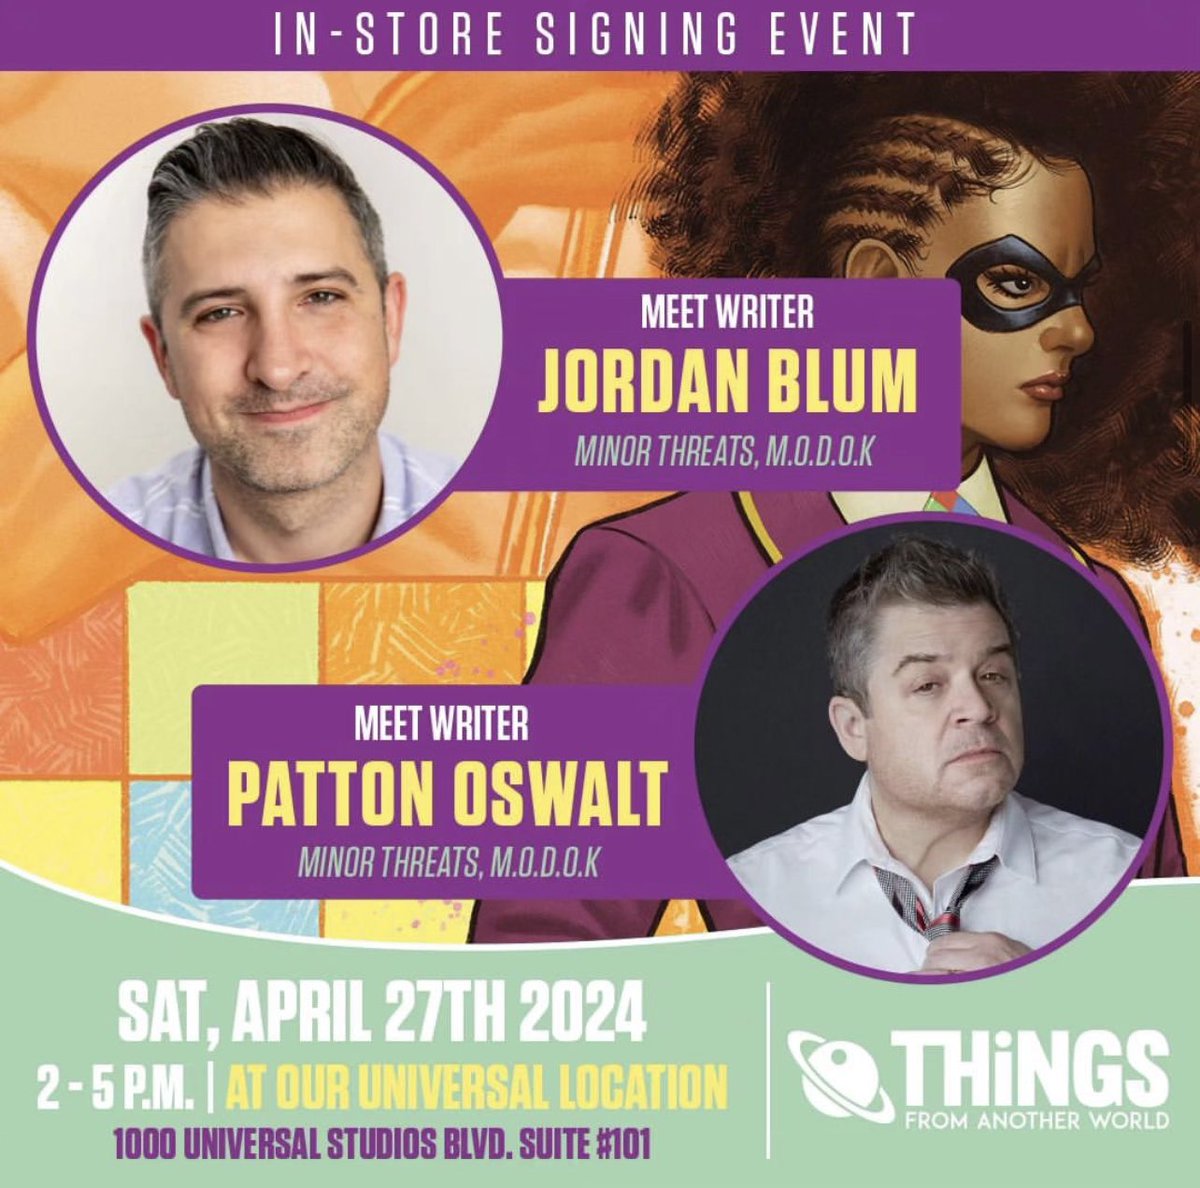 Catch @BlumJordan and @pattonoswalt tomorrow Saturday 4/27 at @universalTFAW from 2-5pm! Our dynamic writing duo will be signing all things Minor Threats! You know you need a copy of the brand new MH: Alternates TPB signed! 🦀